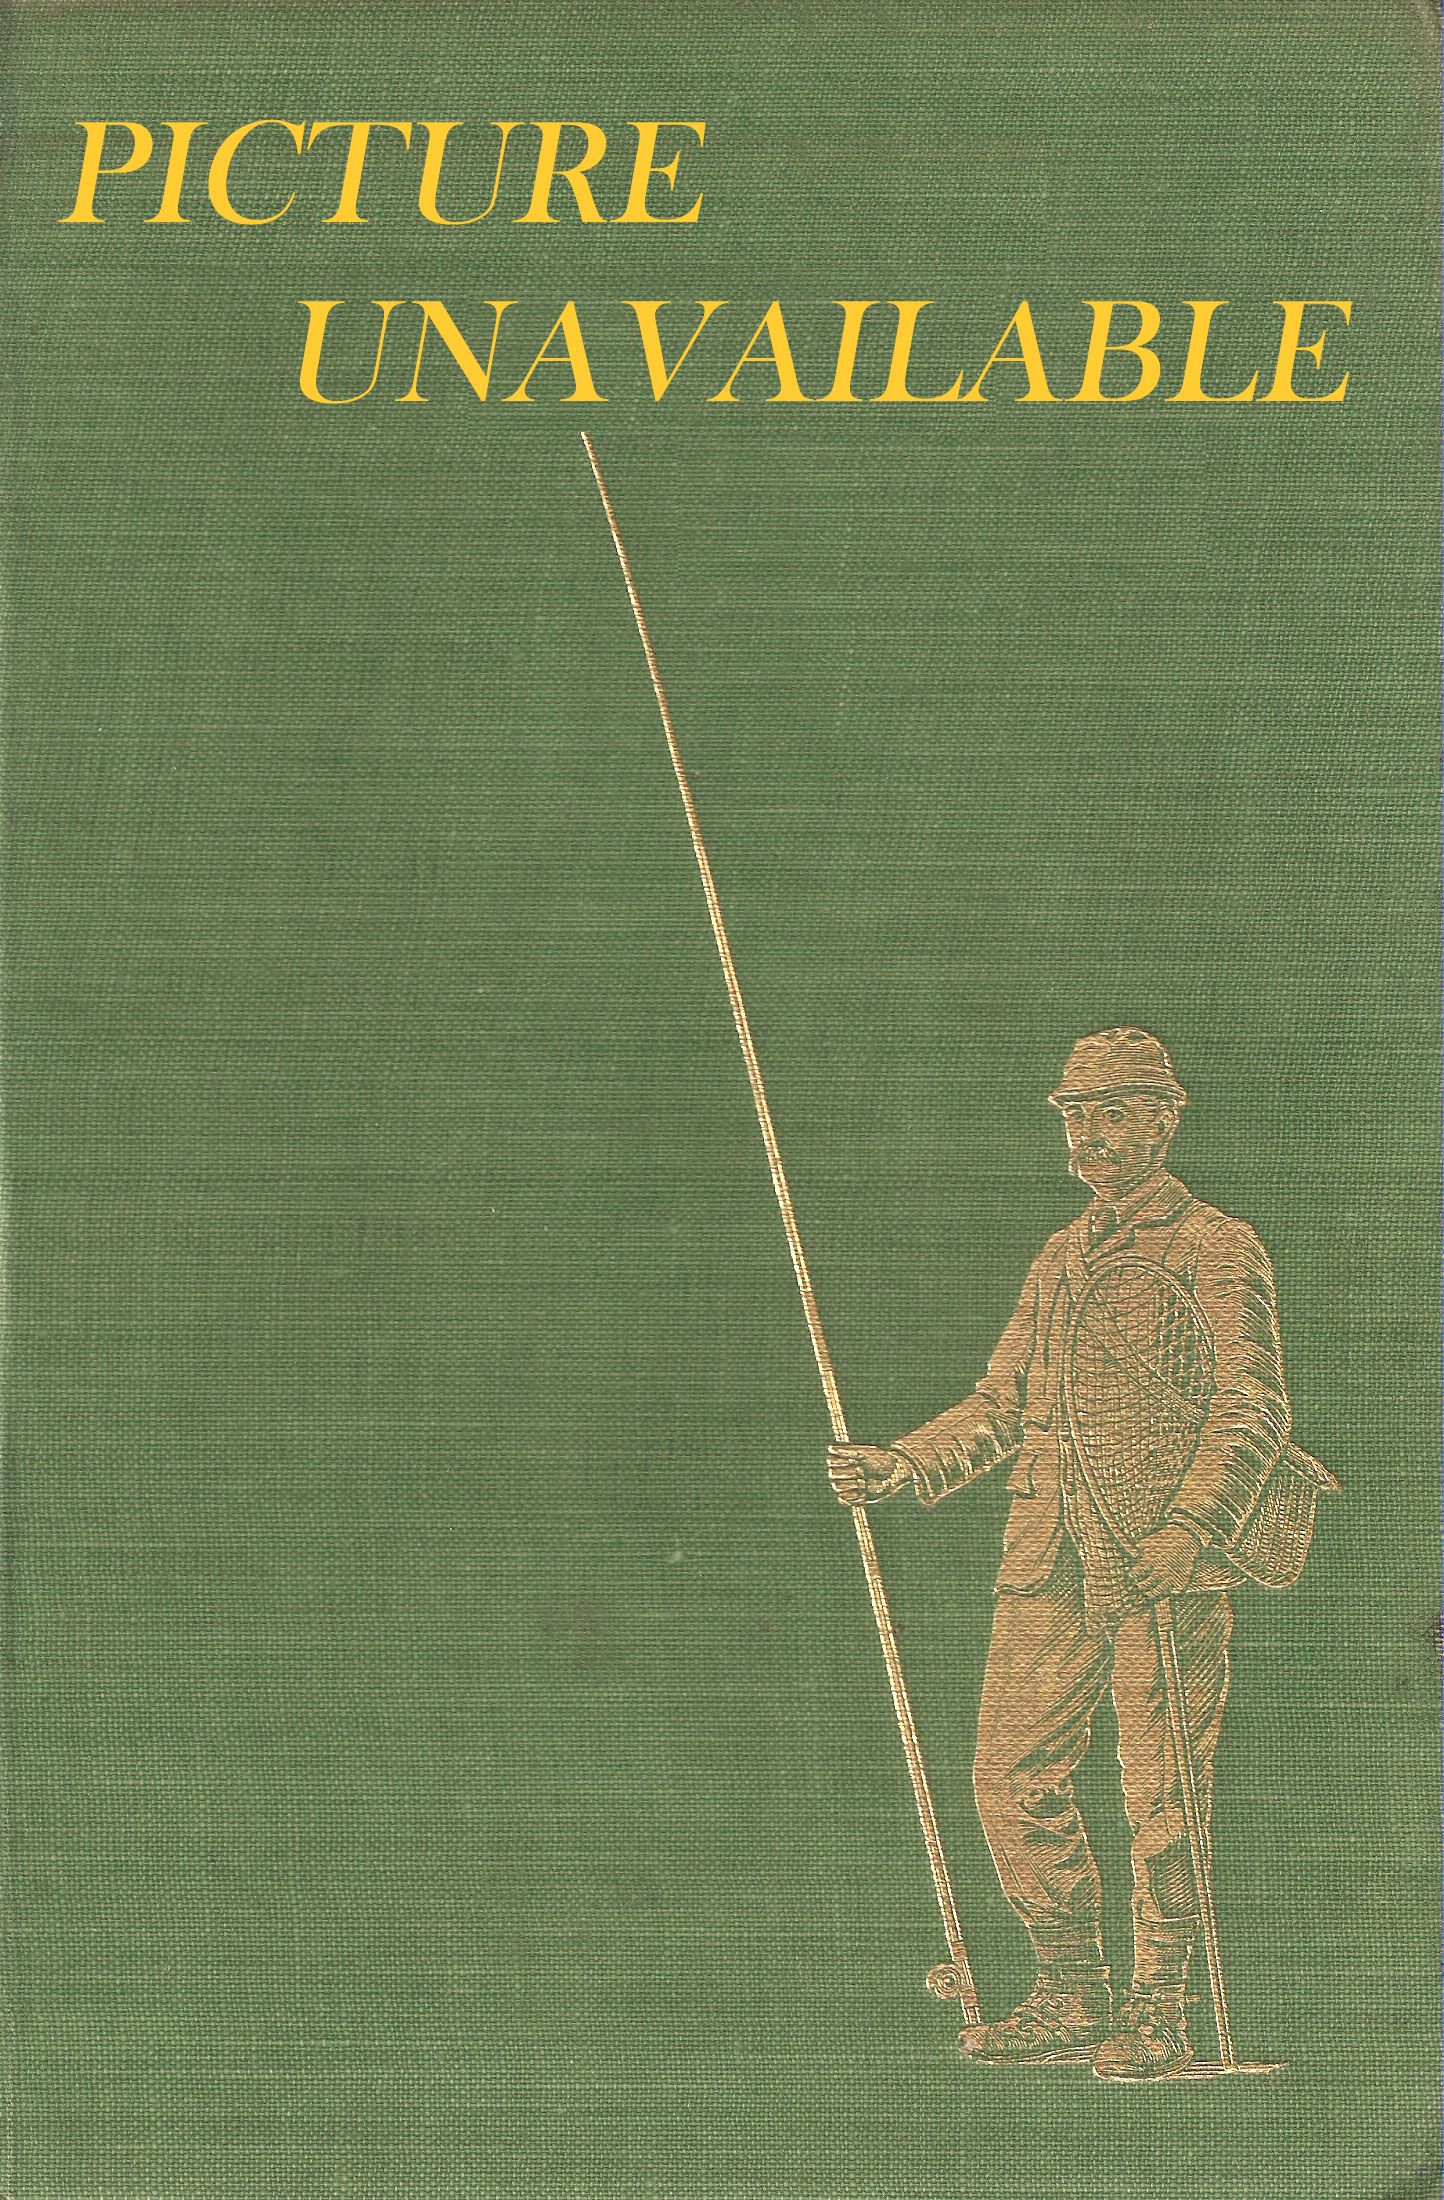 AN ANGLER'S ENTOMOLOGY. By J.R. Harris. Collins New Naturalist No. 23.  1973 second edition reprint.